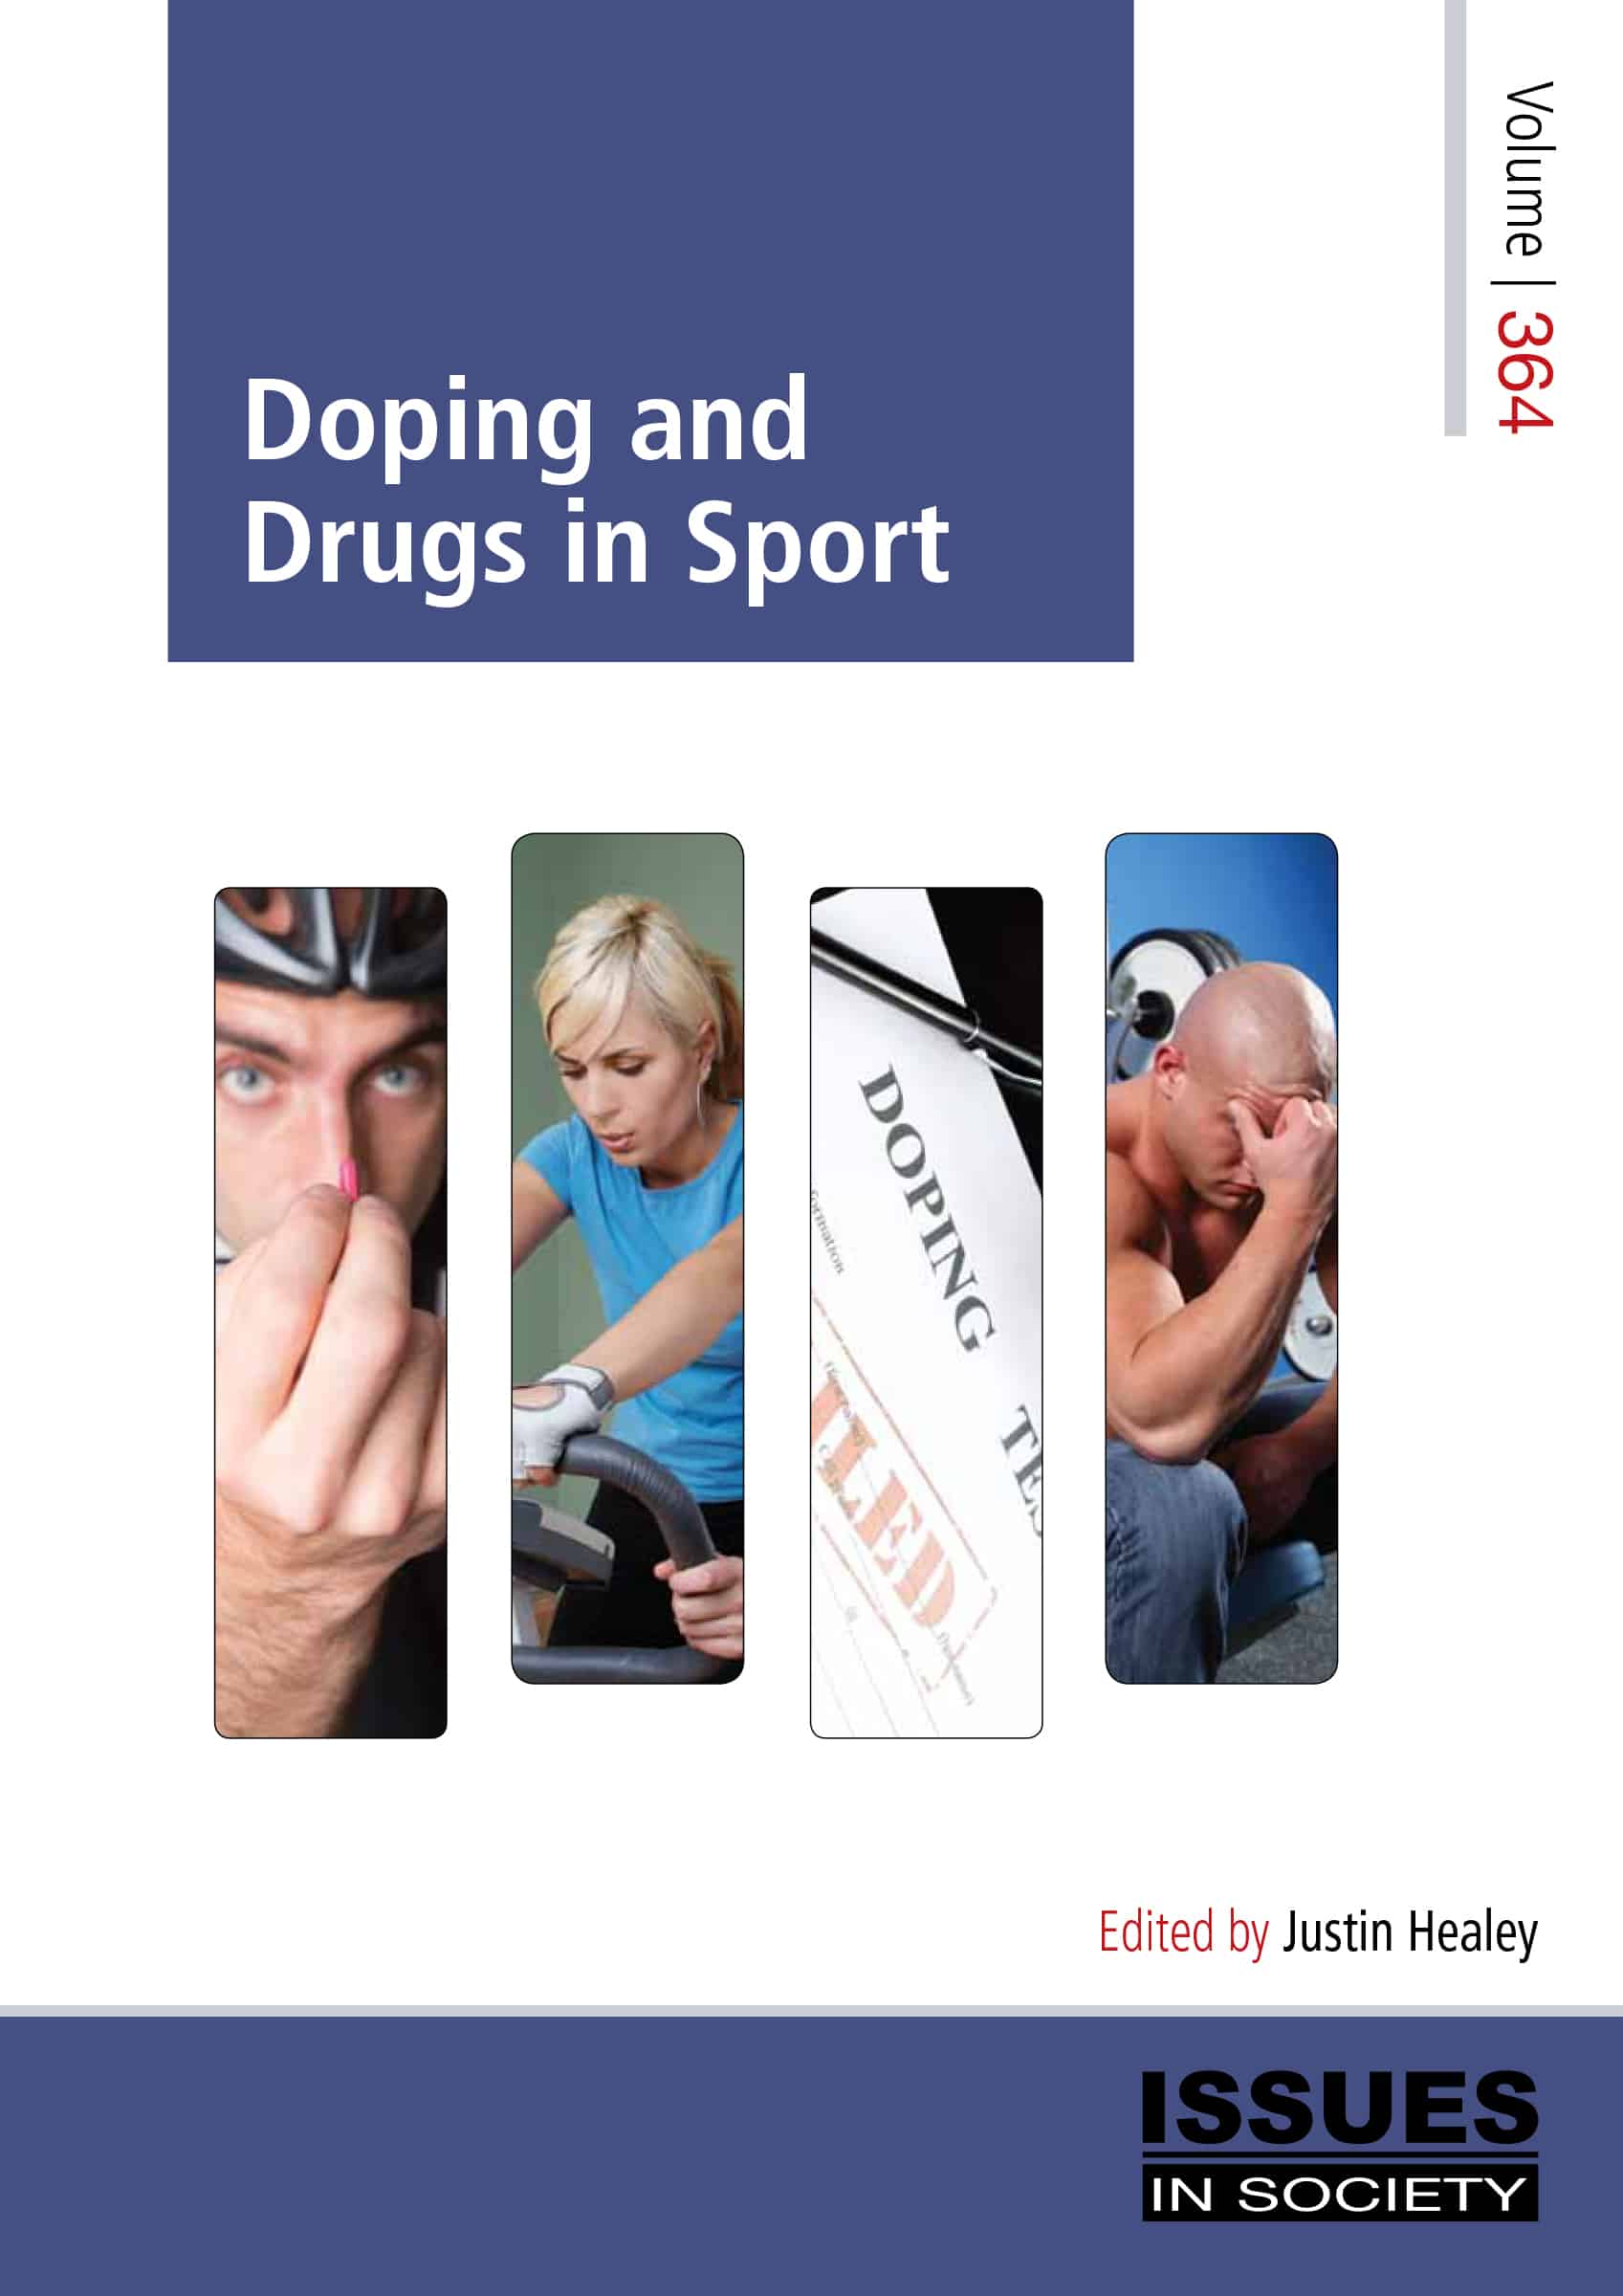 thesis about drugs in sports